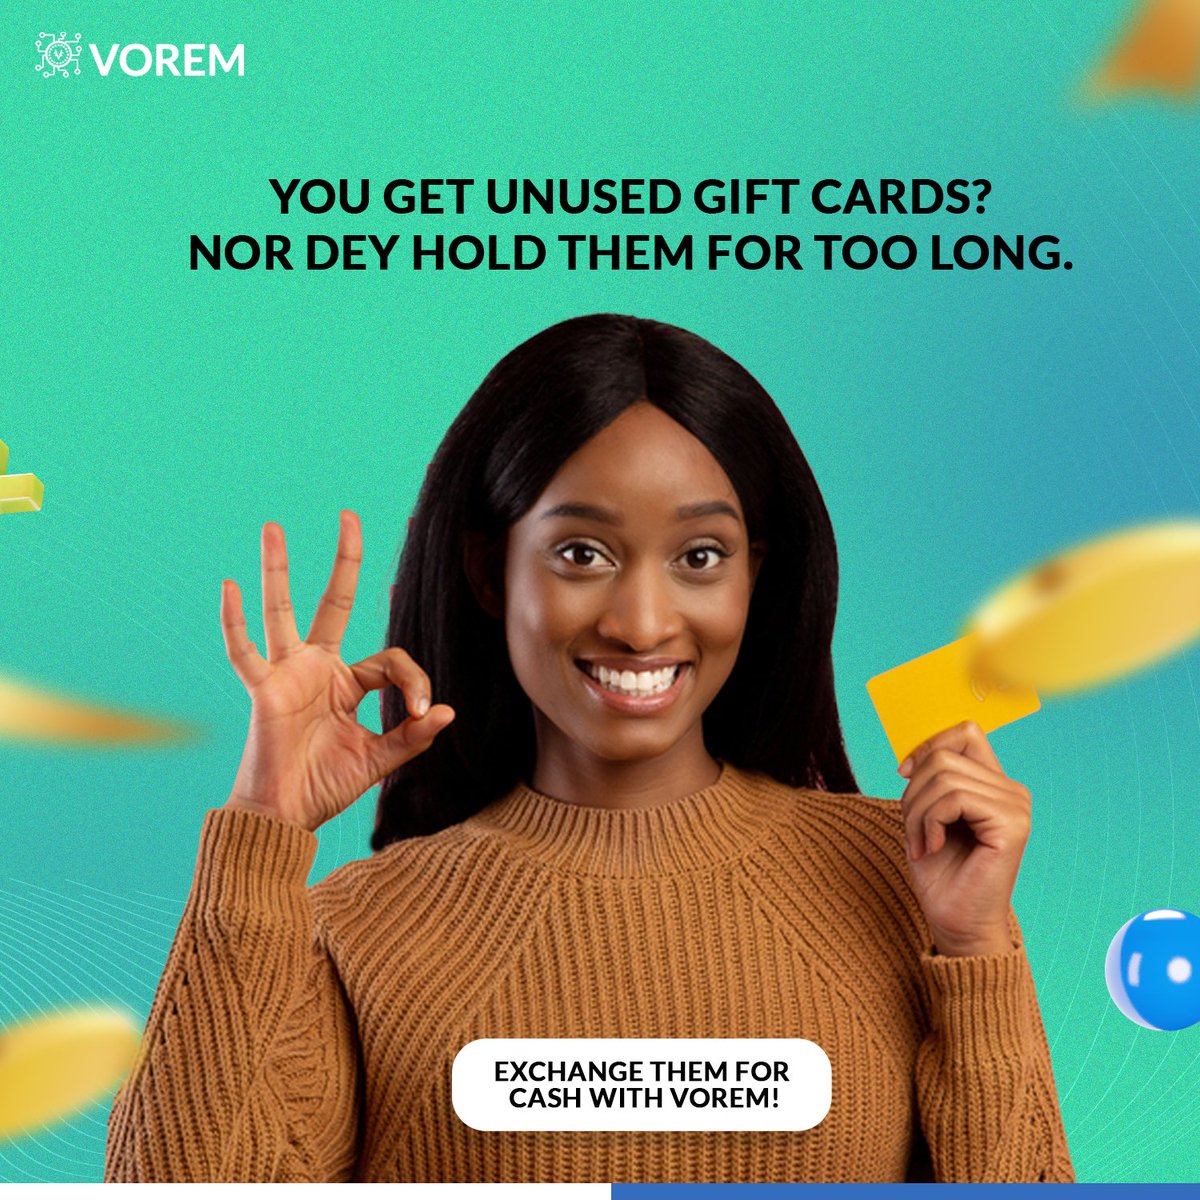 Vorem na the no. 1 place to change your gift cards to cash. Nor day hold your cards Send us DM now! Make we help you. We get better rates 💯 #voremotc #exchangeinnigeria #cryptoexchange #exchangerate